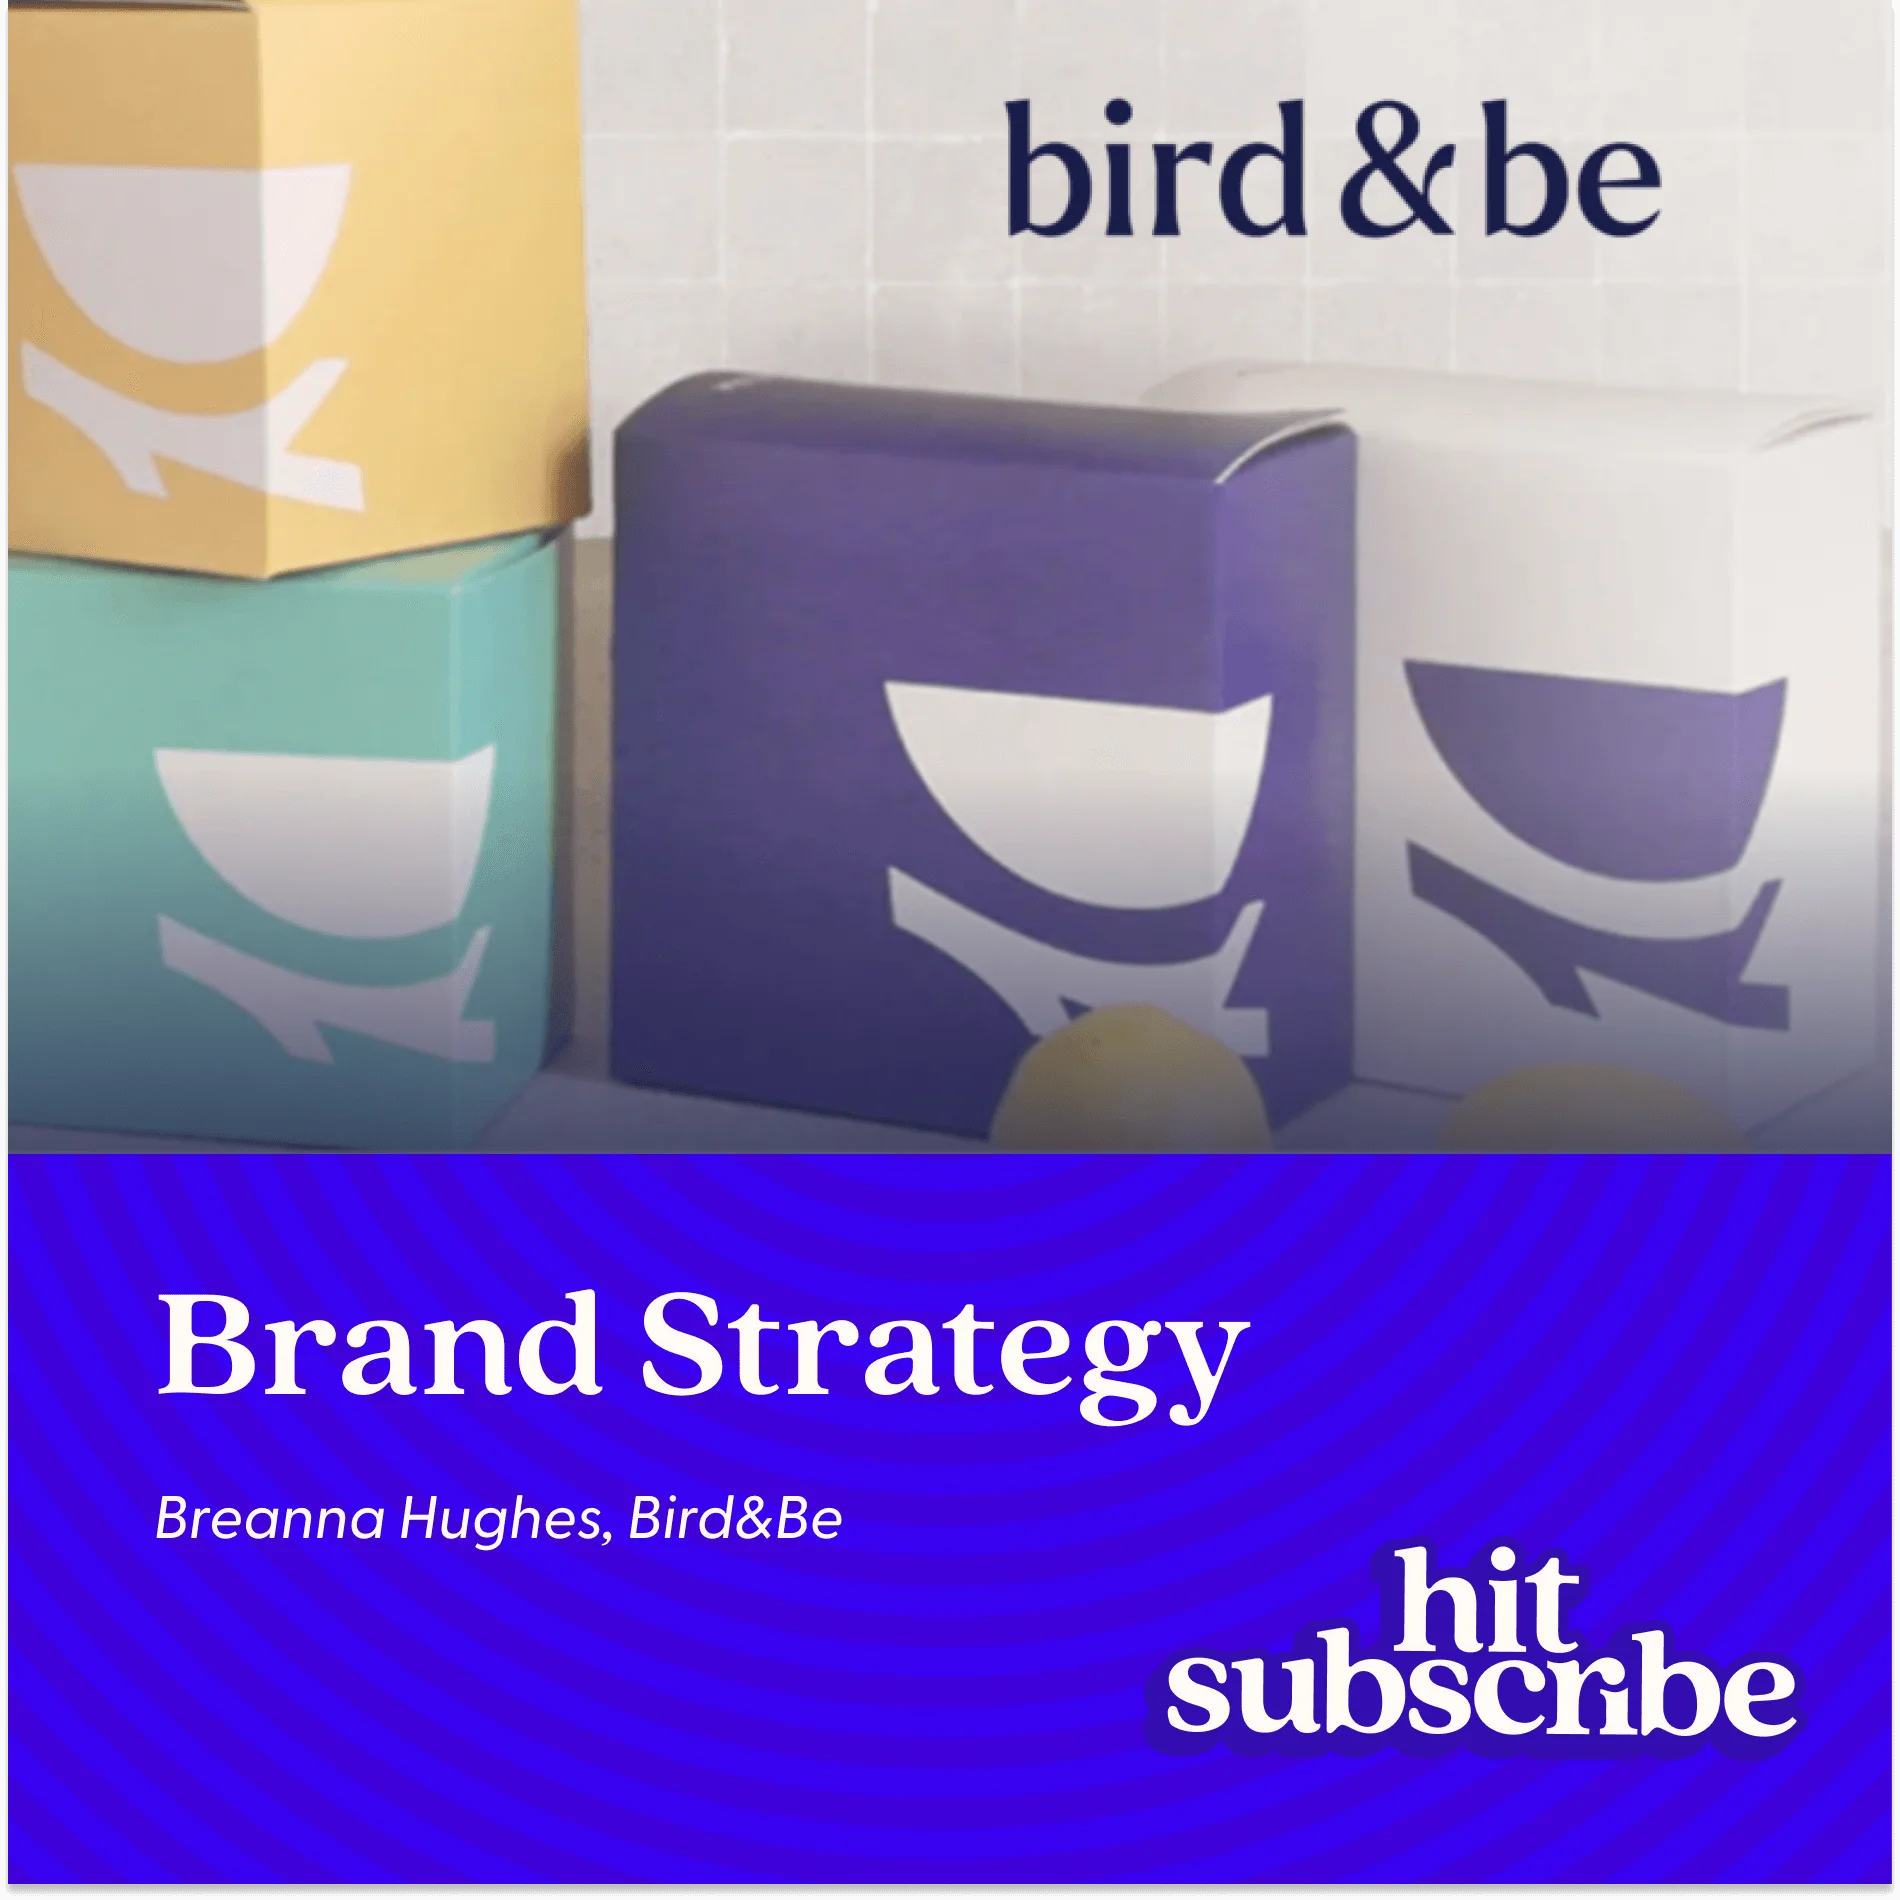 Hit Subscribe podcast episode cover featuring Breanna Hughes, Co-founder, Bird&Be